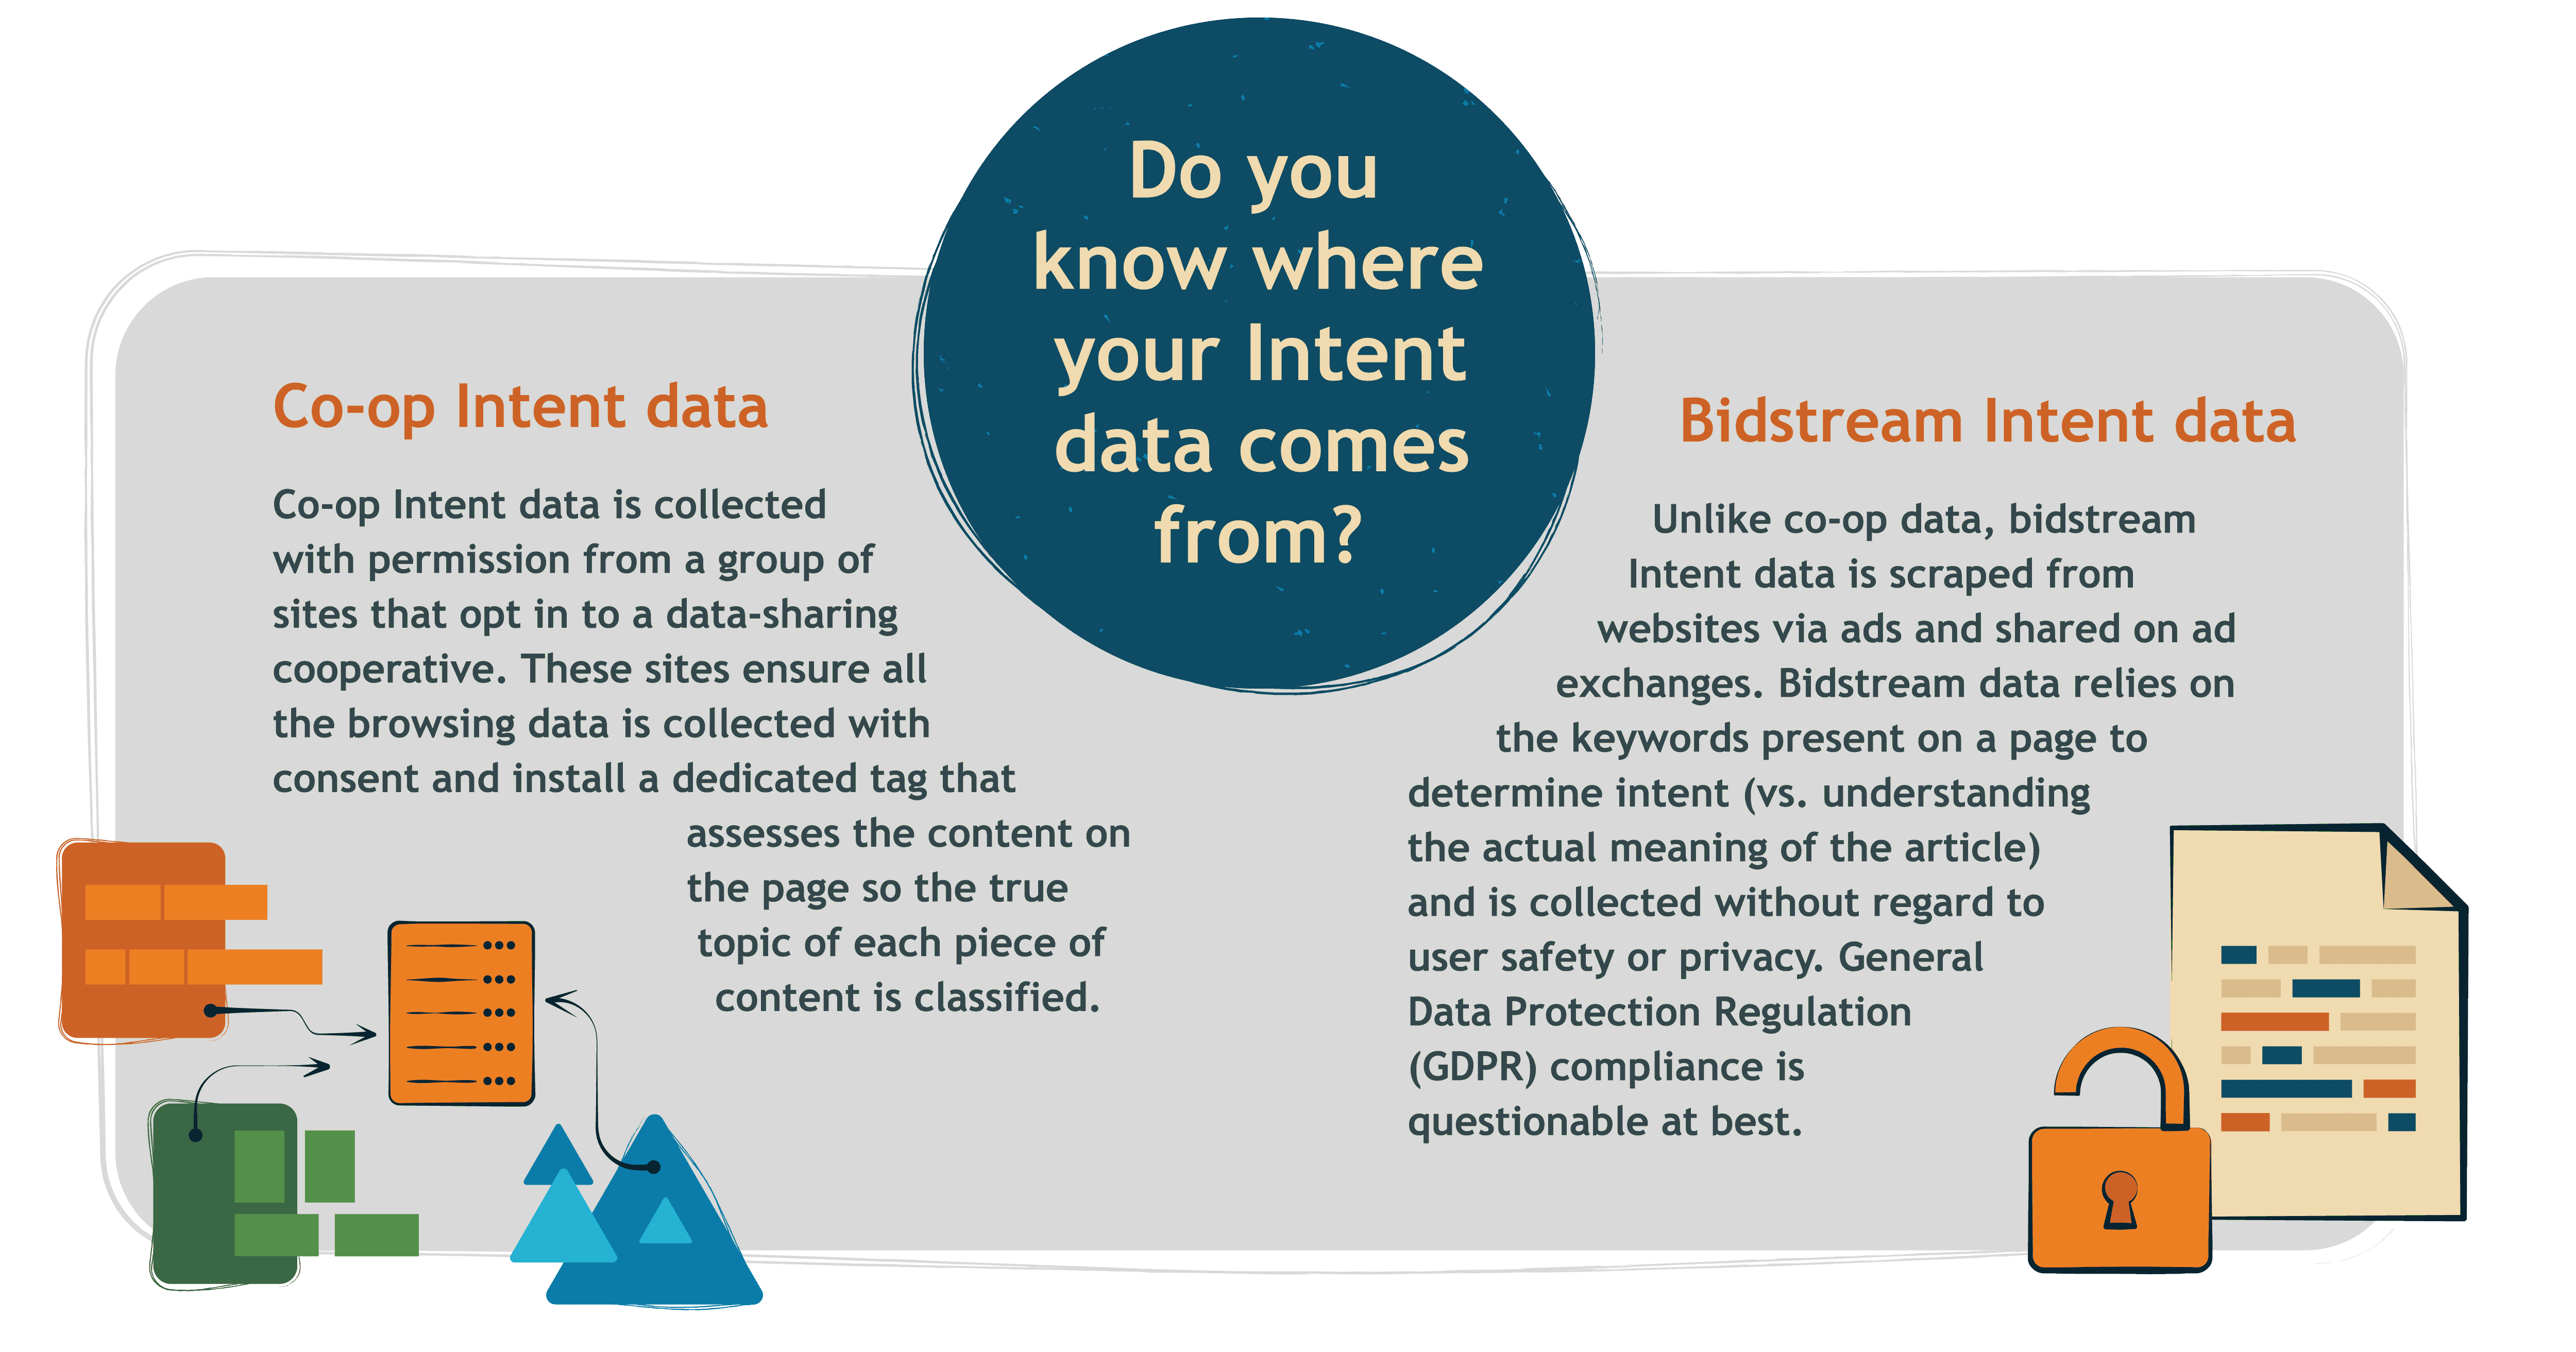 Do you know where your Intent data comes from